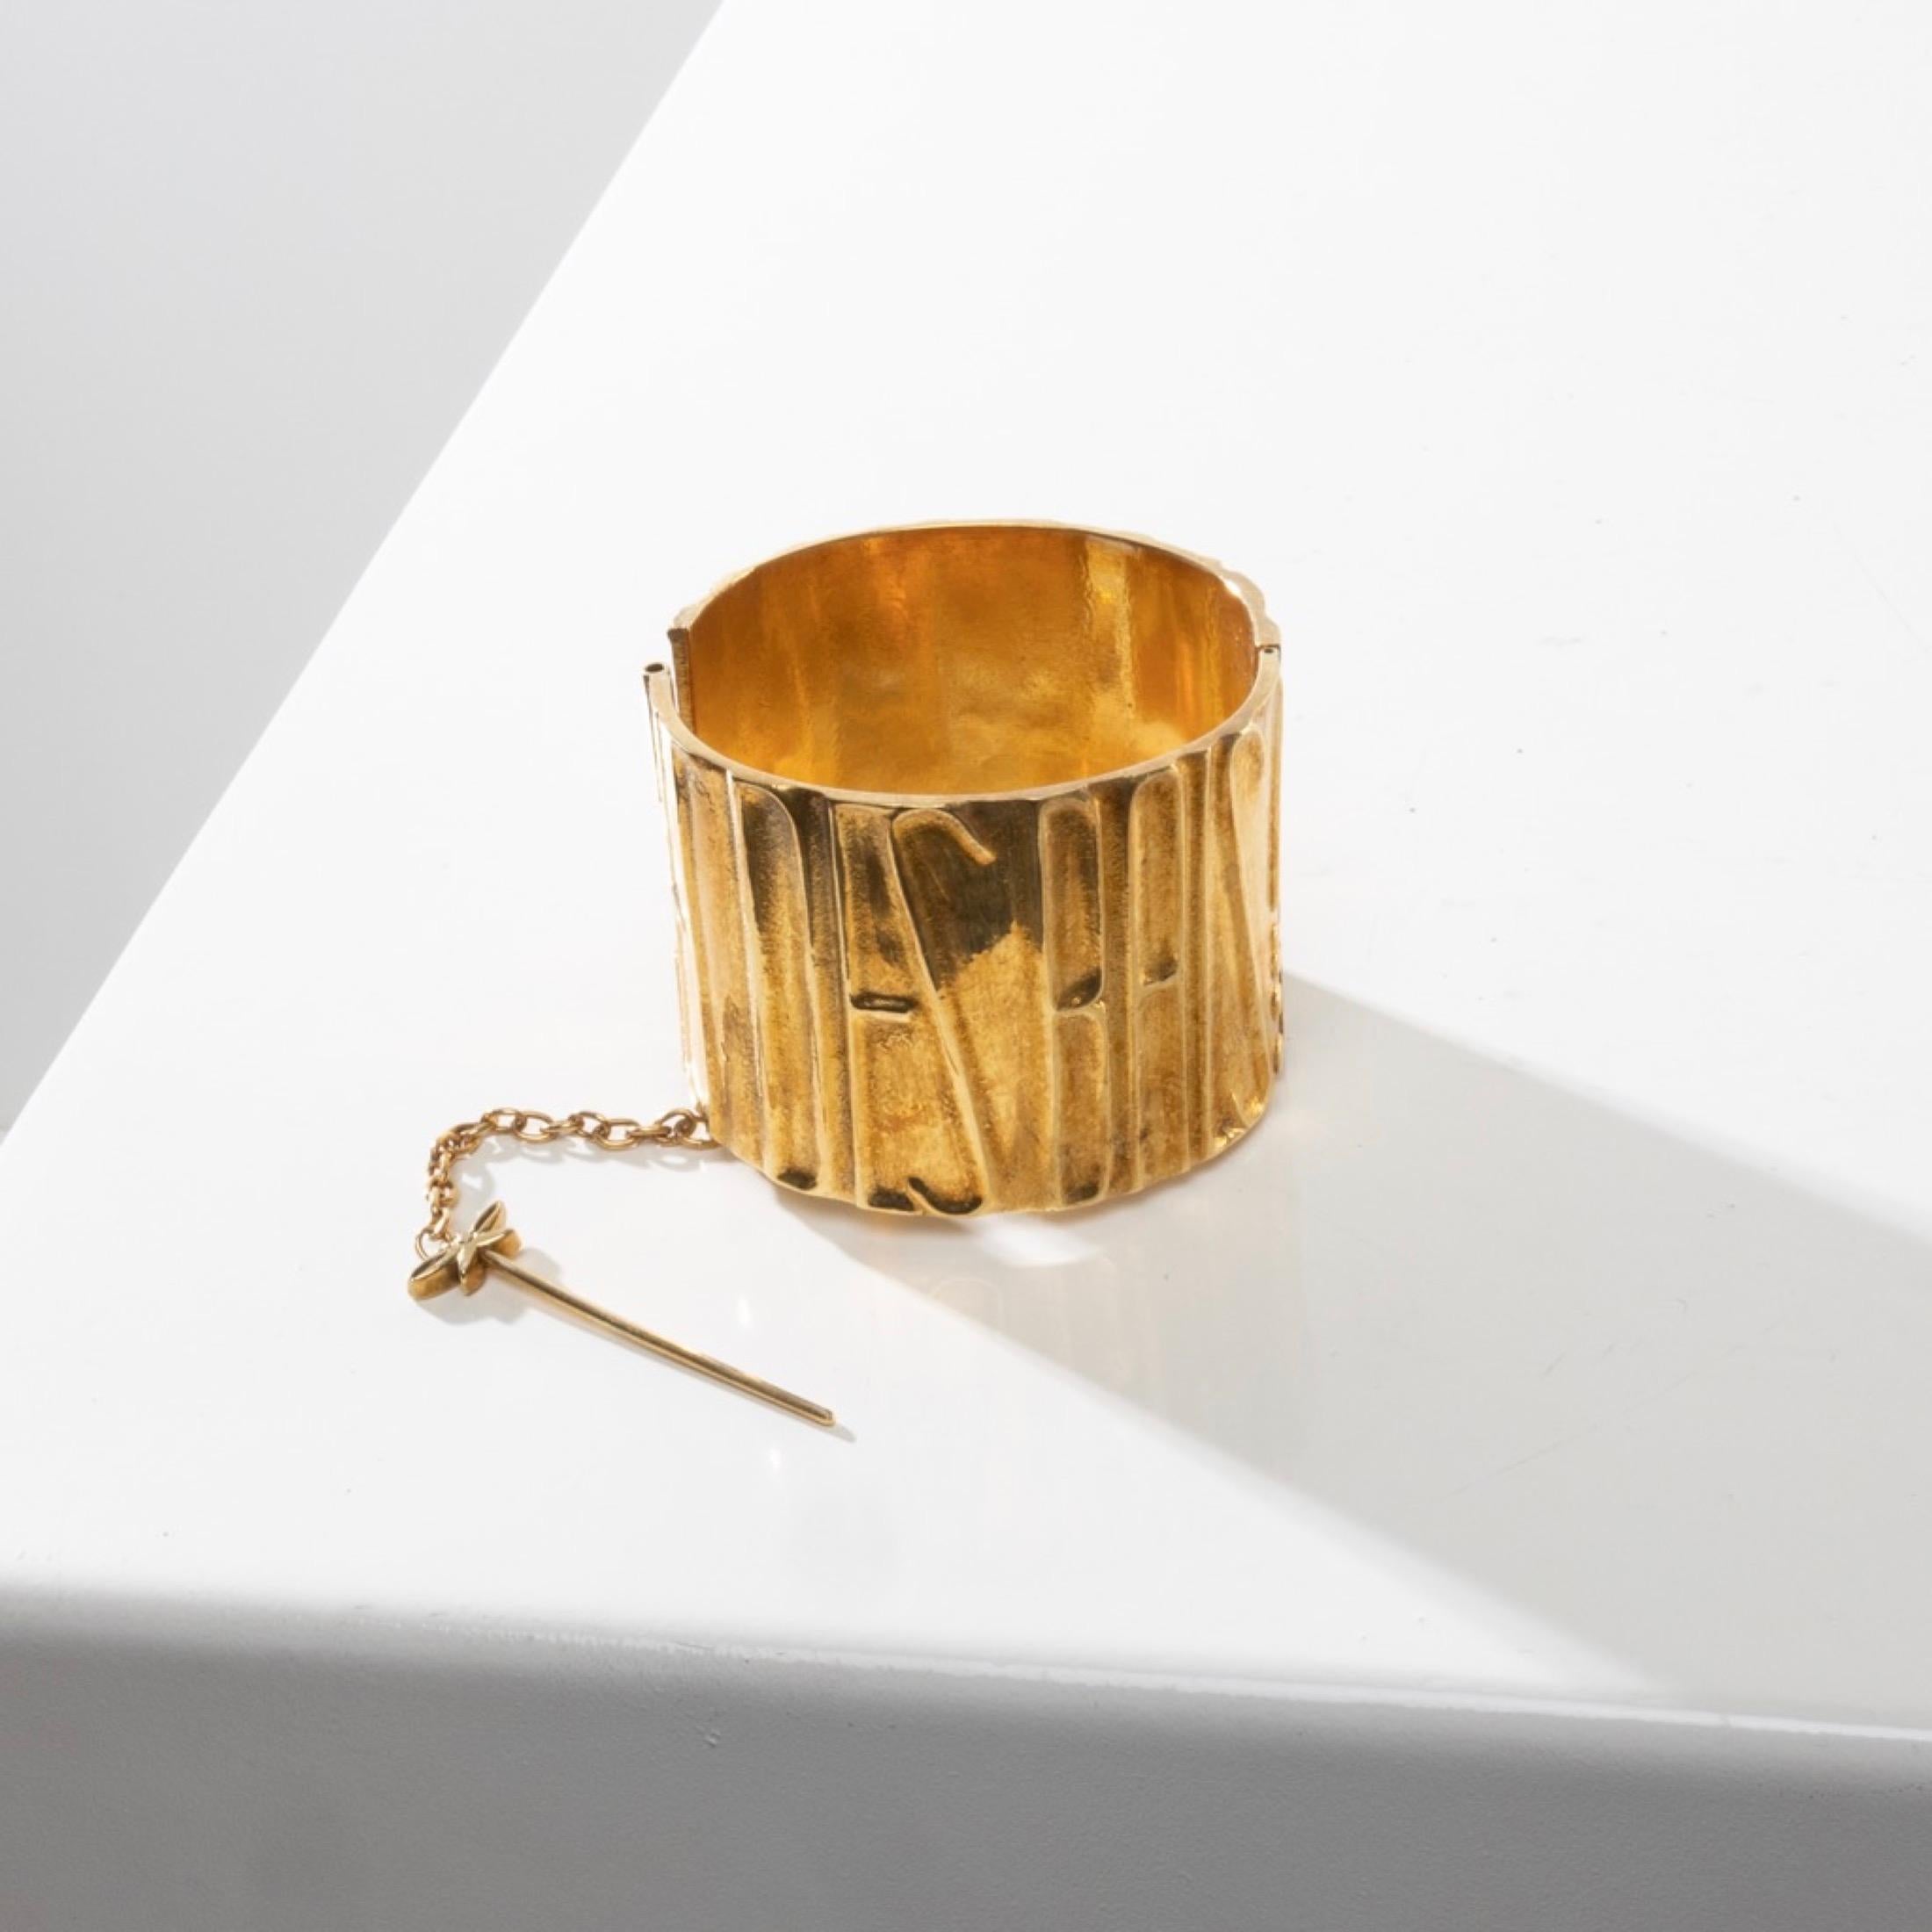 Cuff bracelet made up of two parts of identical dimensions.
“Powder and balls !” is a two-way message imagined by Line Vautrin on the eve of the Second World War.
The first message evoked the powder from a compact to go out at night to the ball,